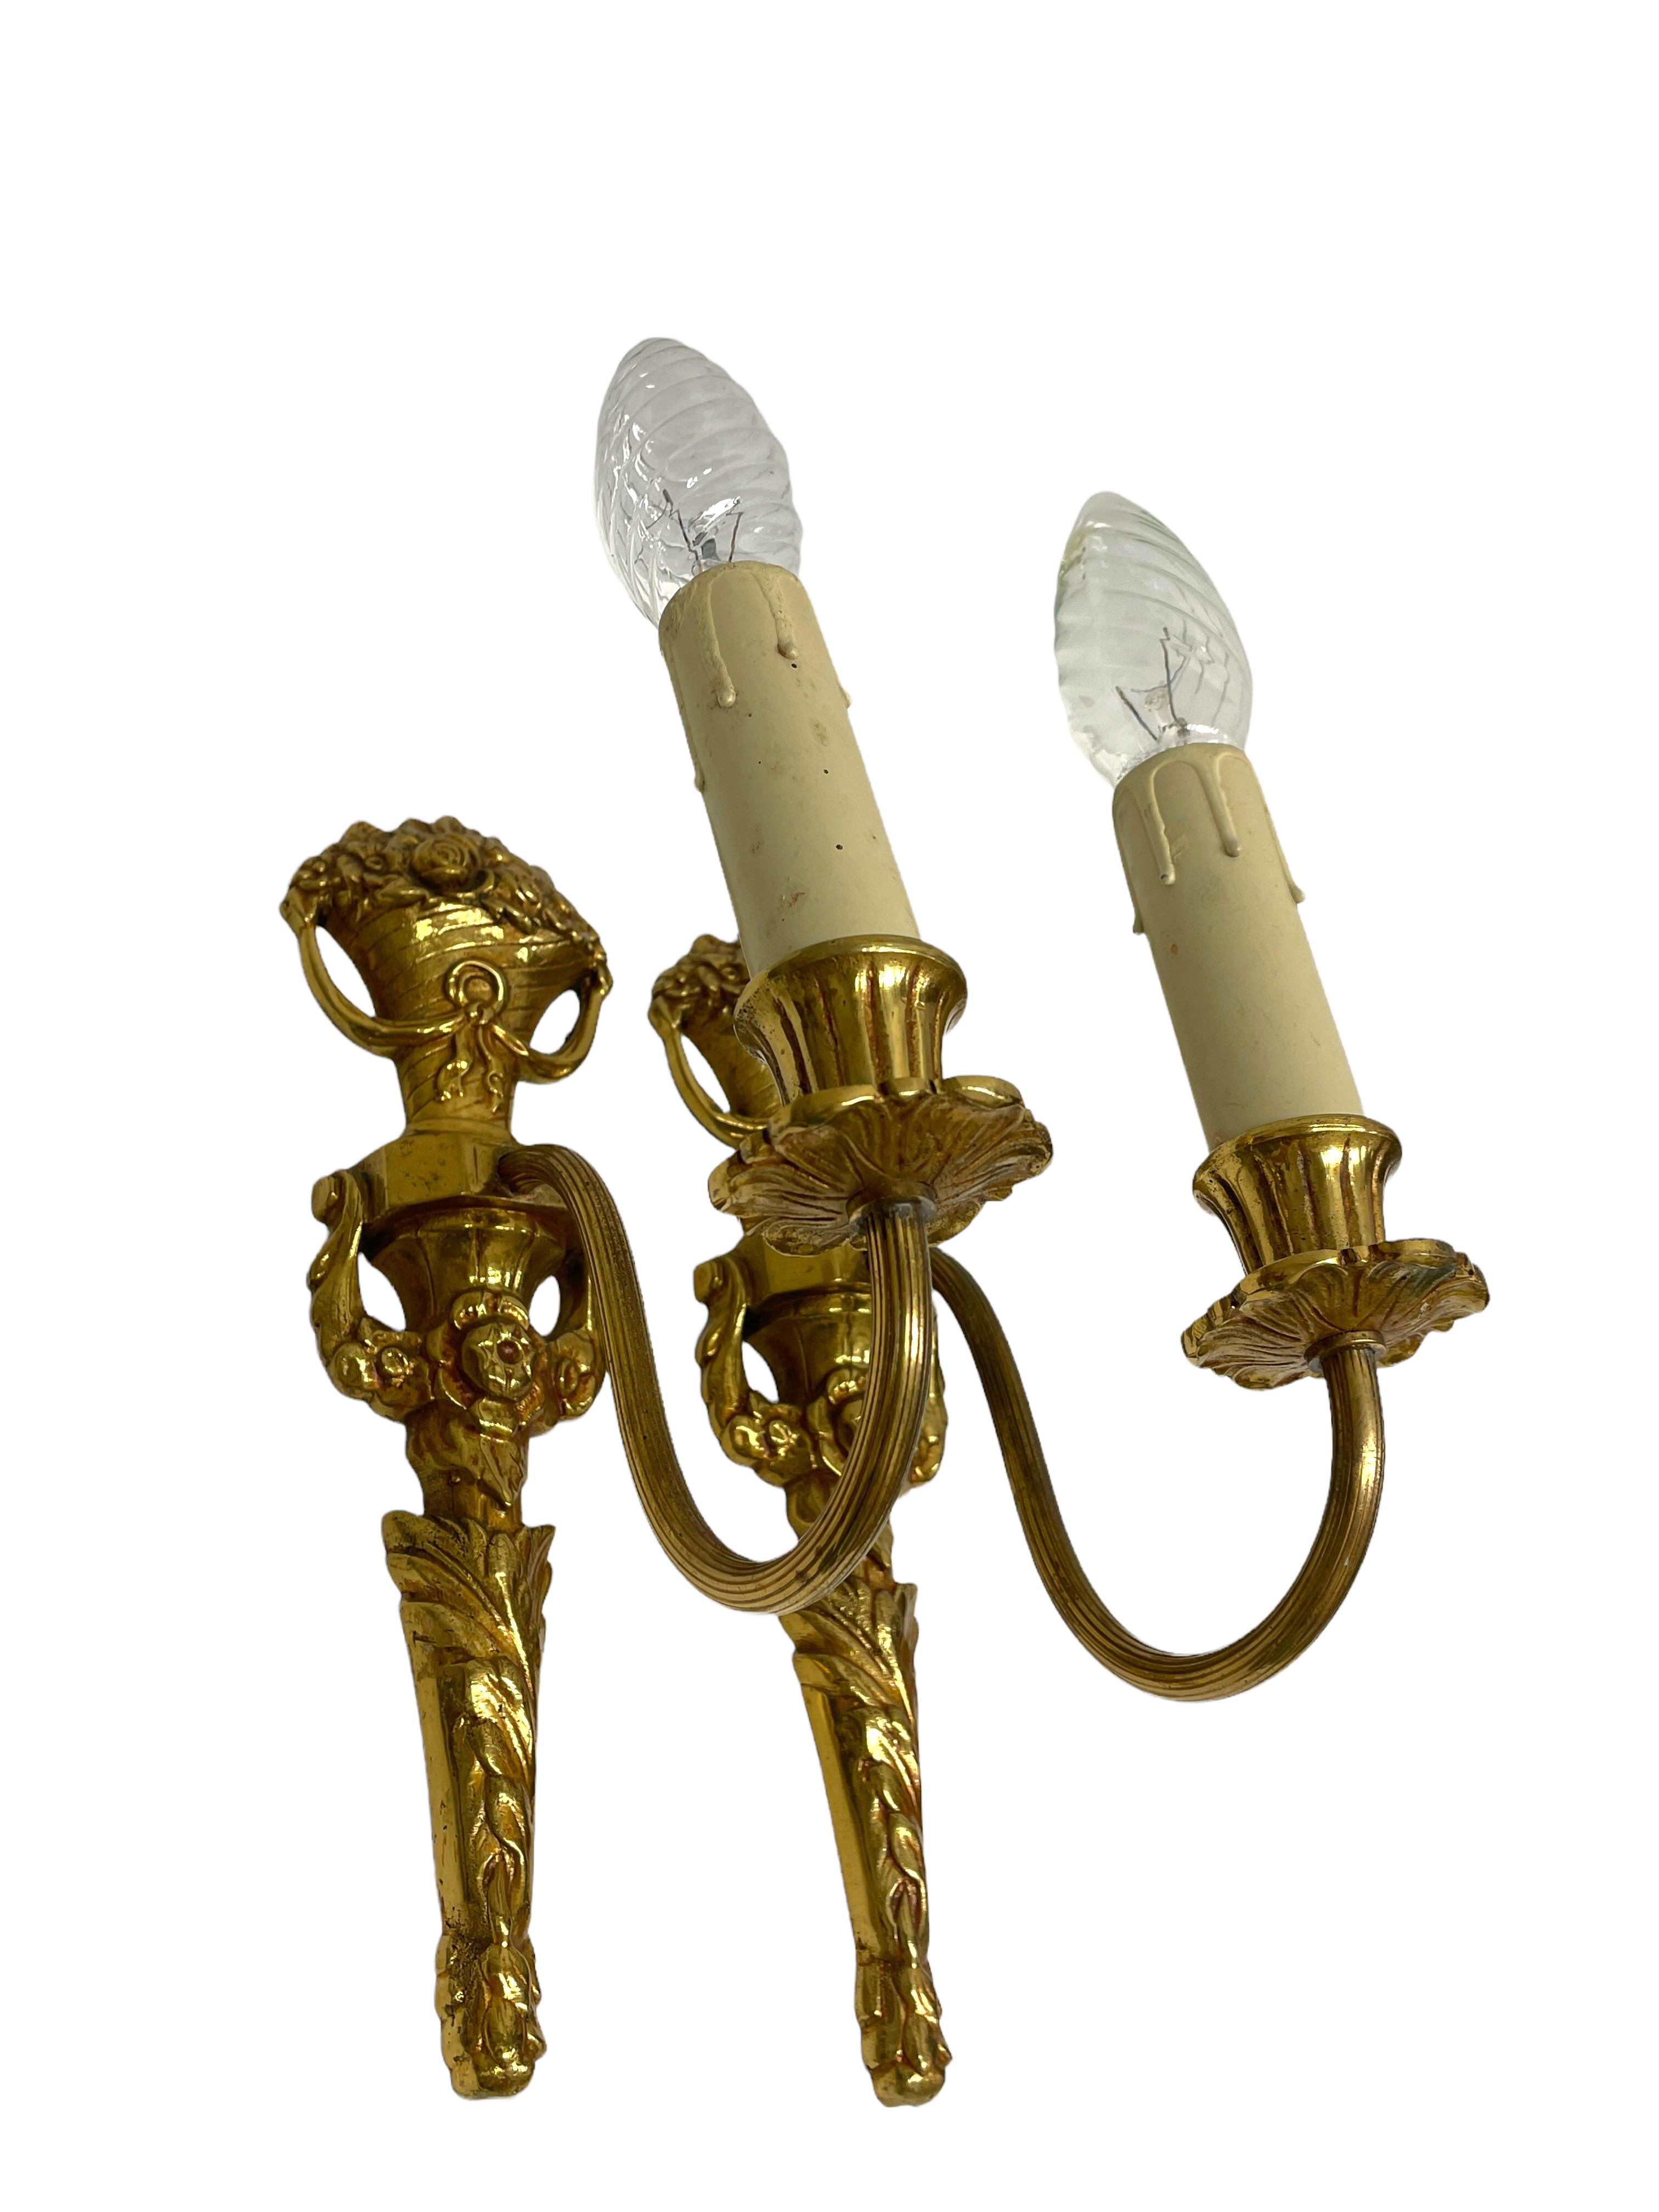 Pair of Empire Wall Sconces in Bronze with Flower Basket Motif, Sweden, 1950s For Sale 2